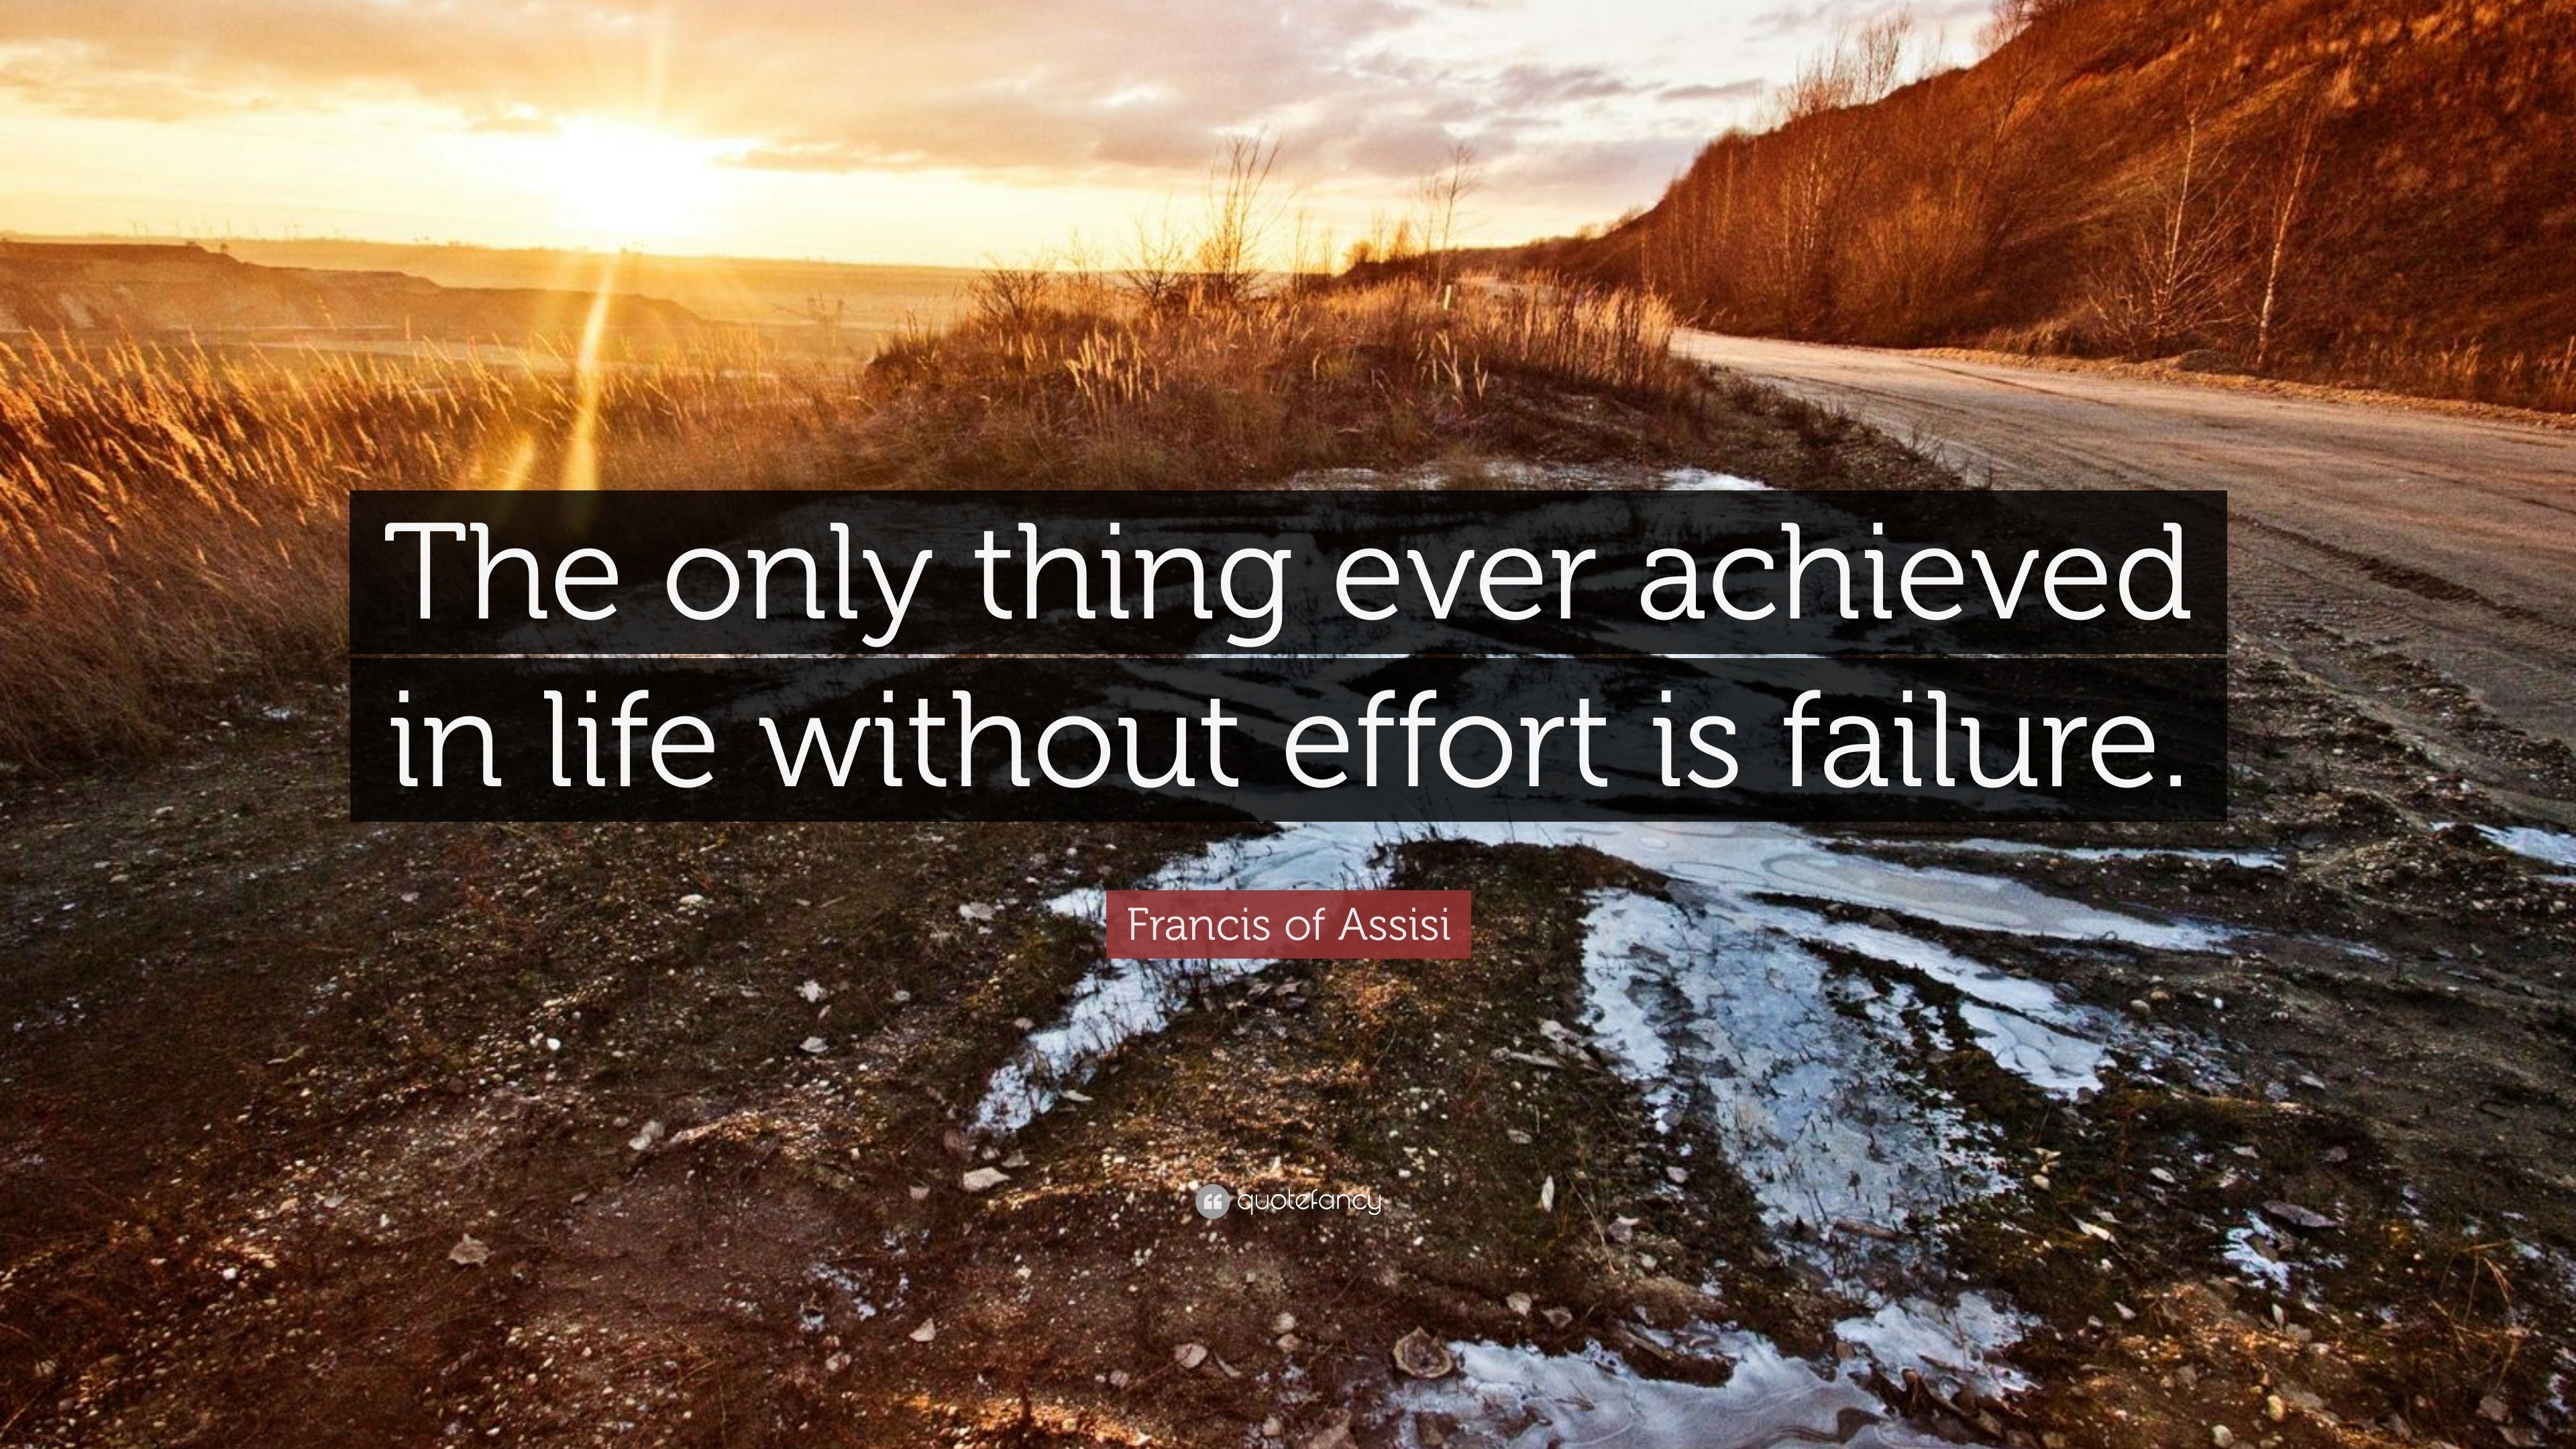 Francis of Assisi Quote: “The only thing ever achieved in life without ...